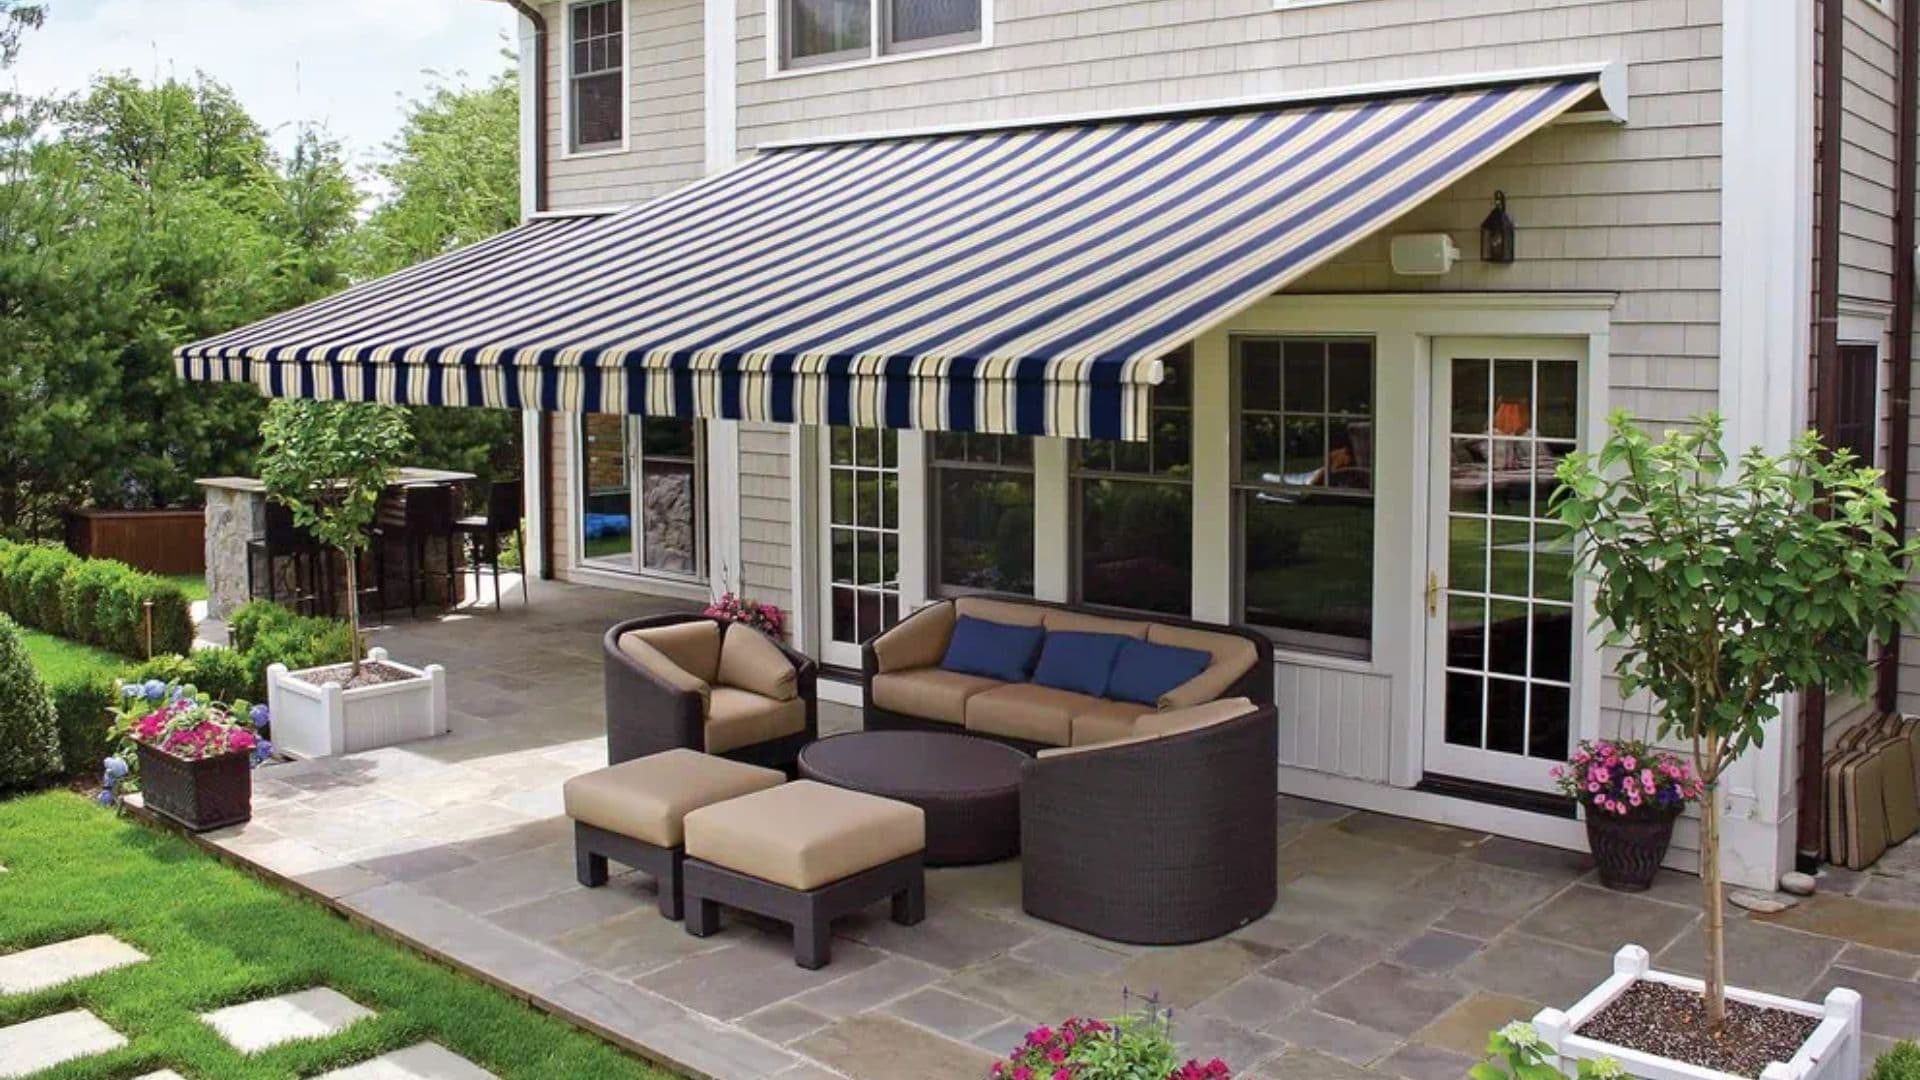 What Sizes Do Retractable Patio Awnings Come In?